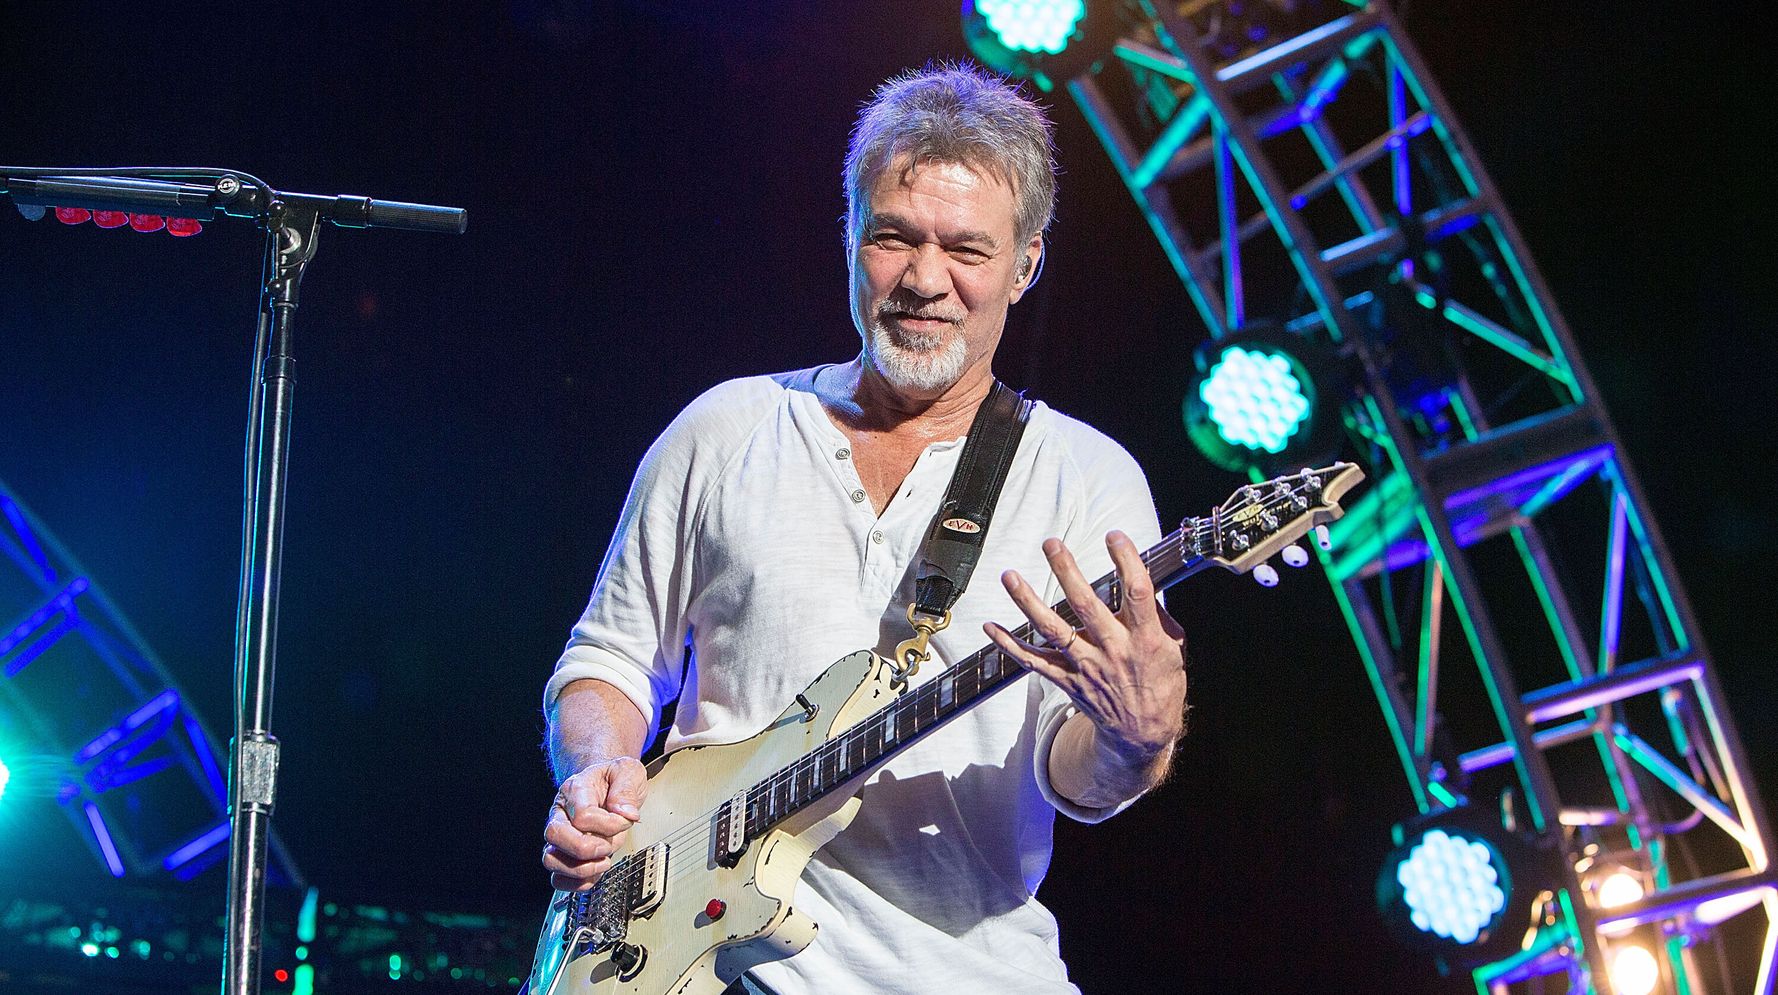 Eddie Van Halen’s son talks about being “hurt” by the way the Grammys honored their father